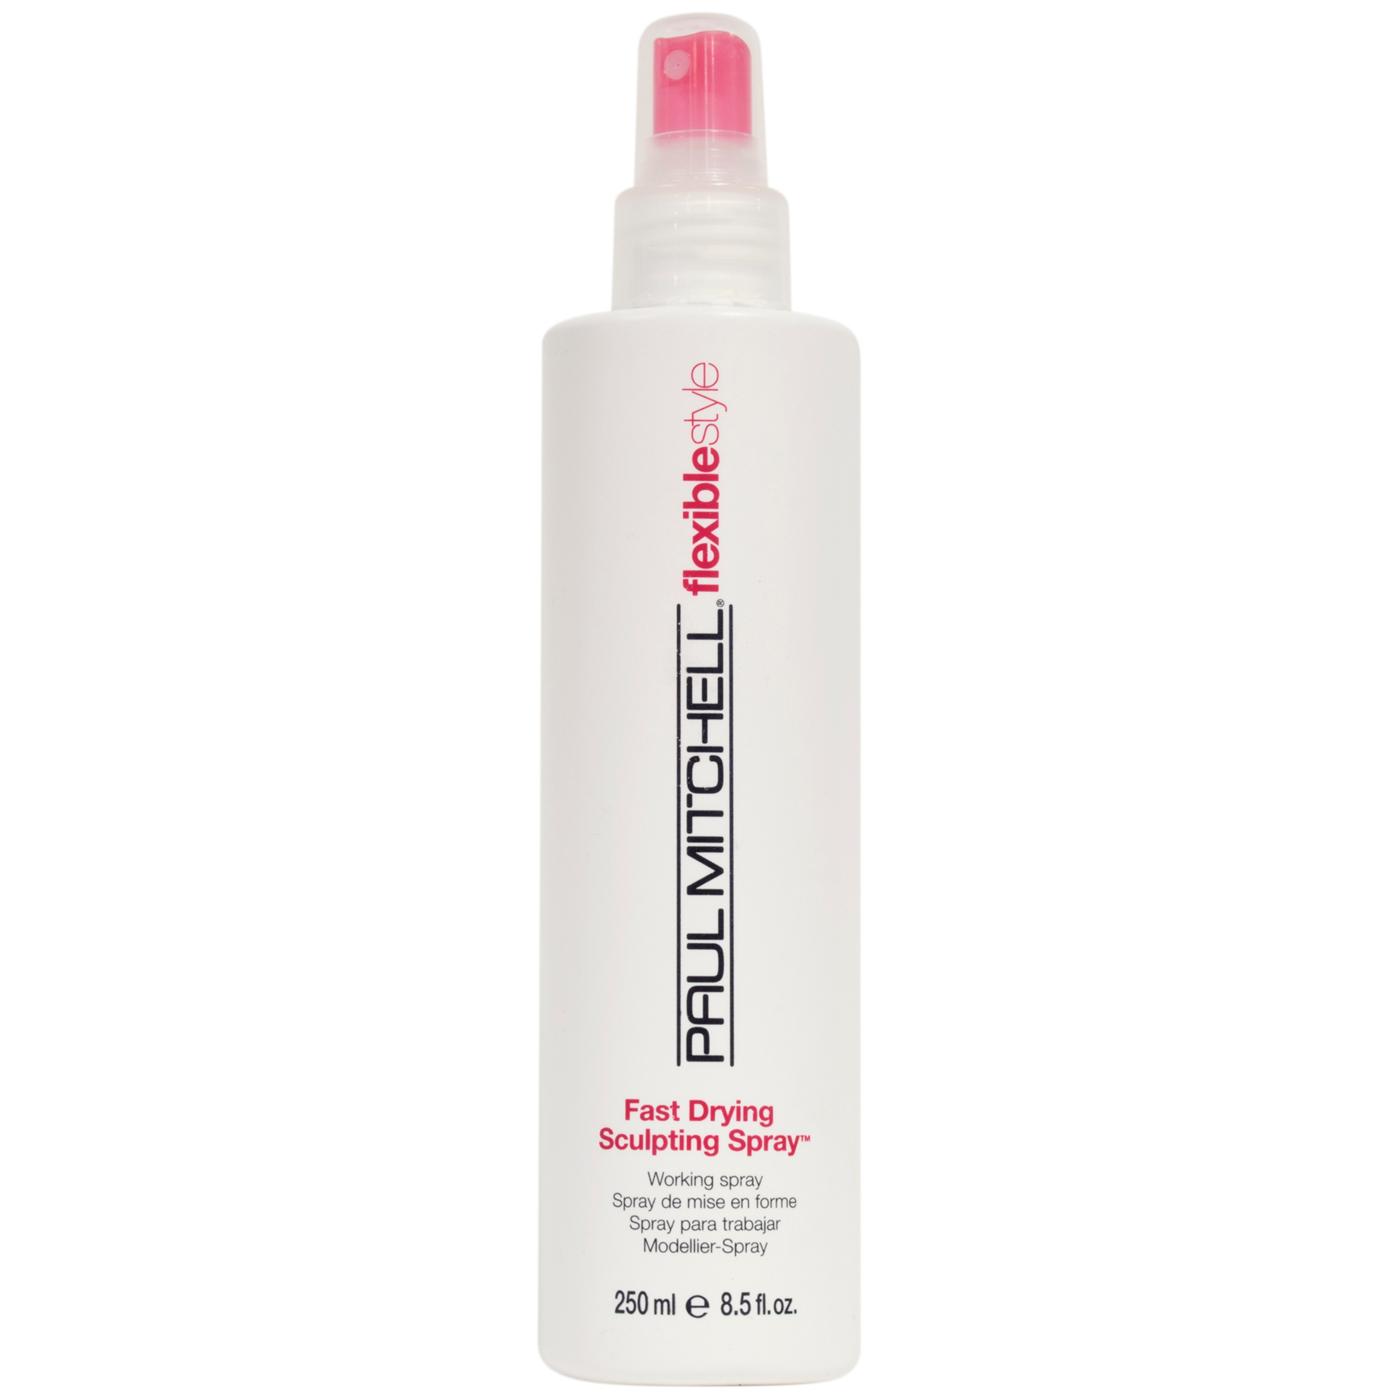 Paul Mitchell Fast Drying Sculpting Spray; image 1 of 2